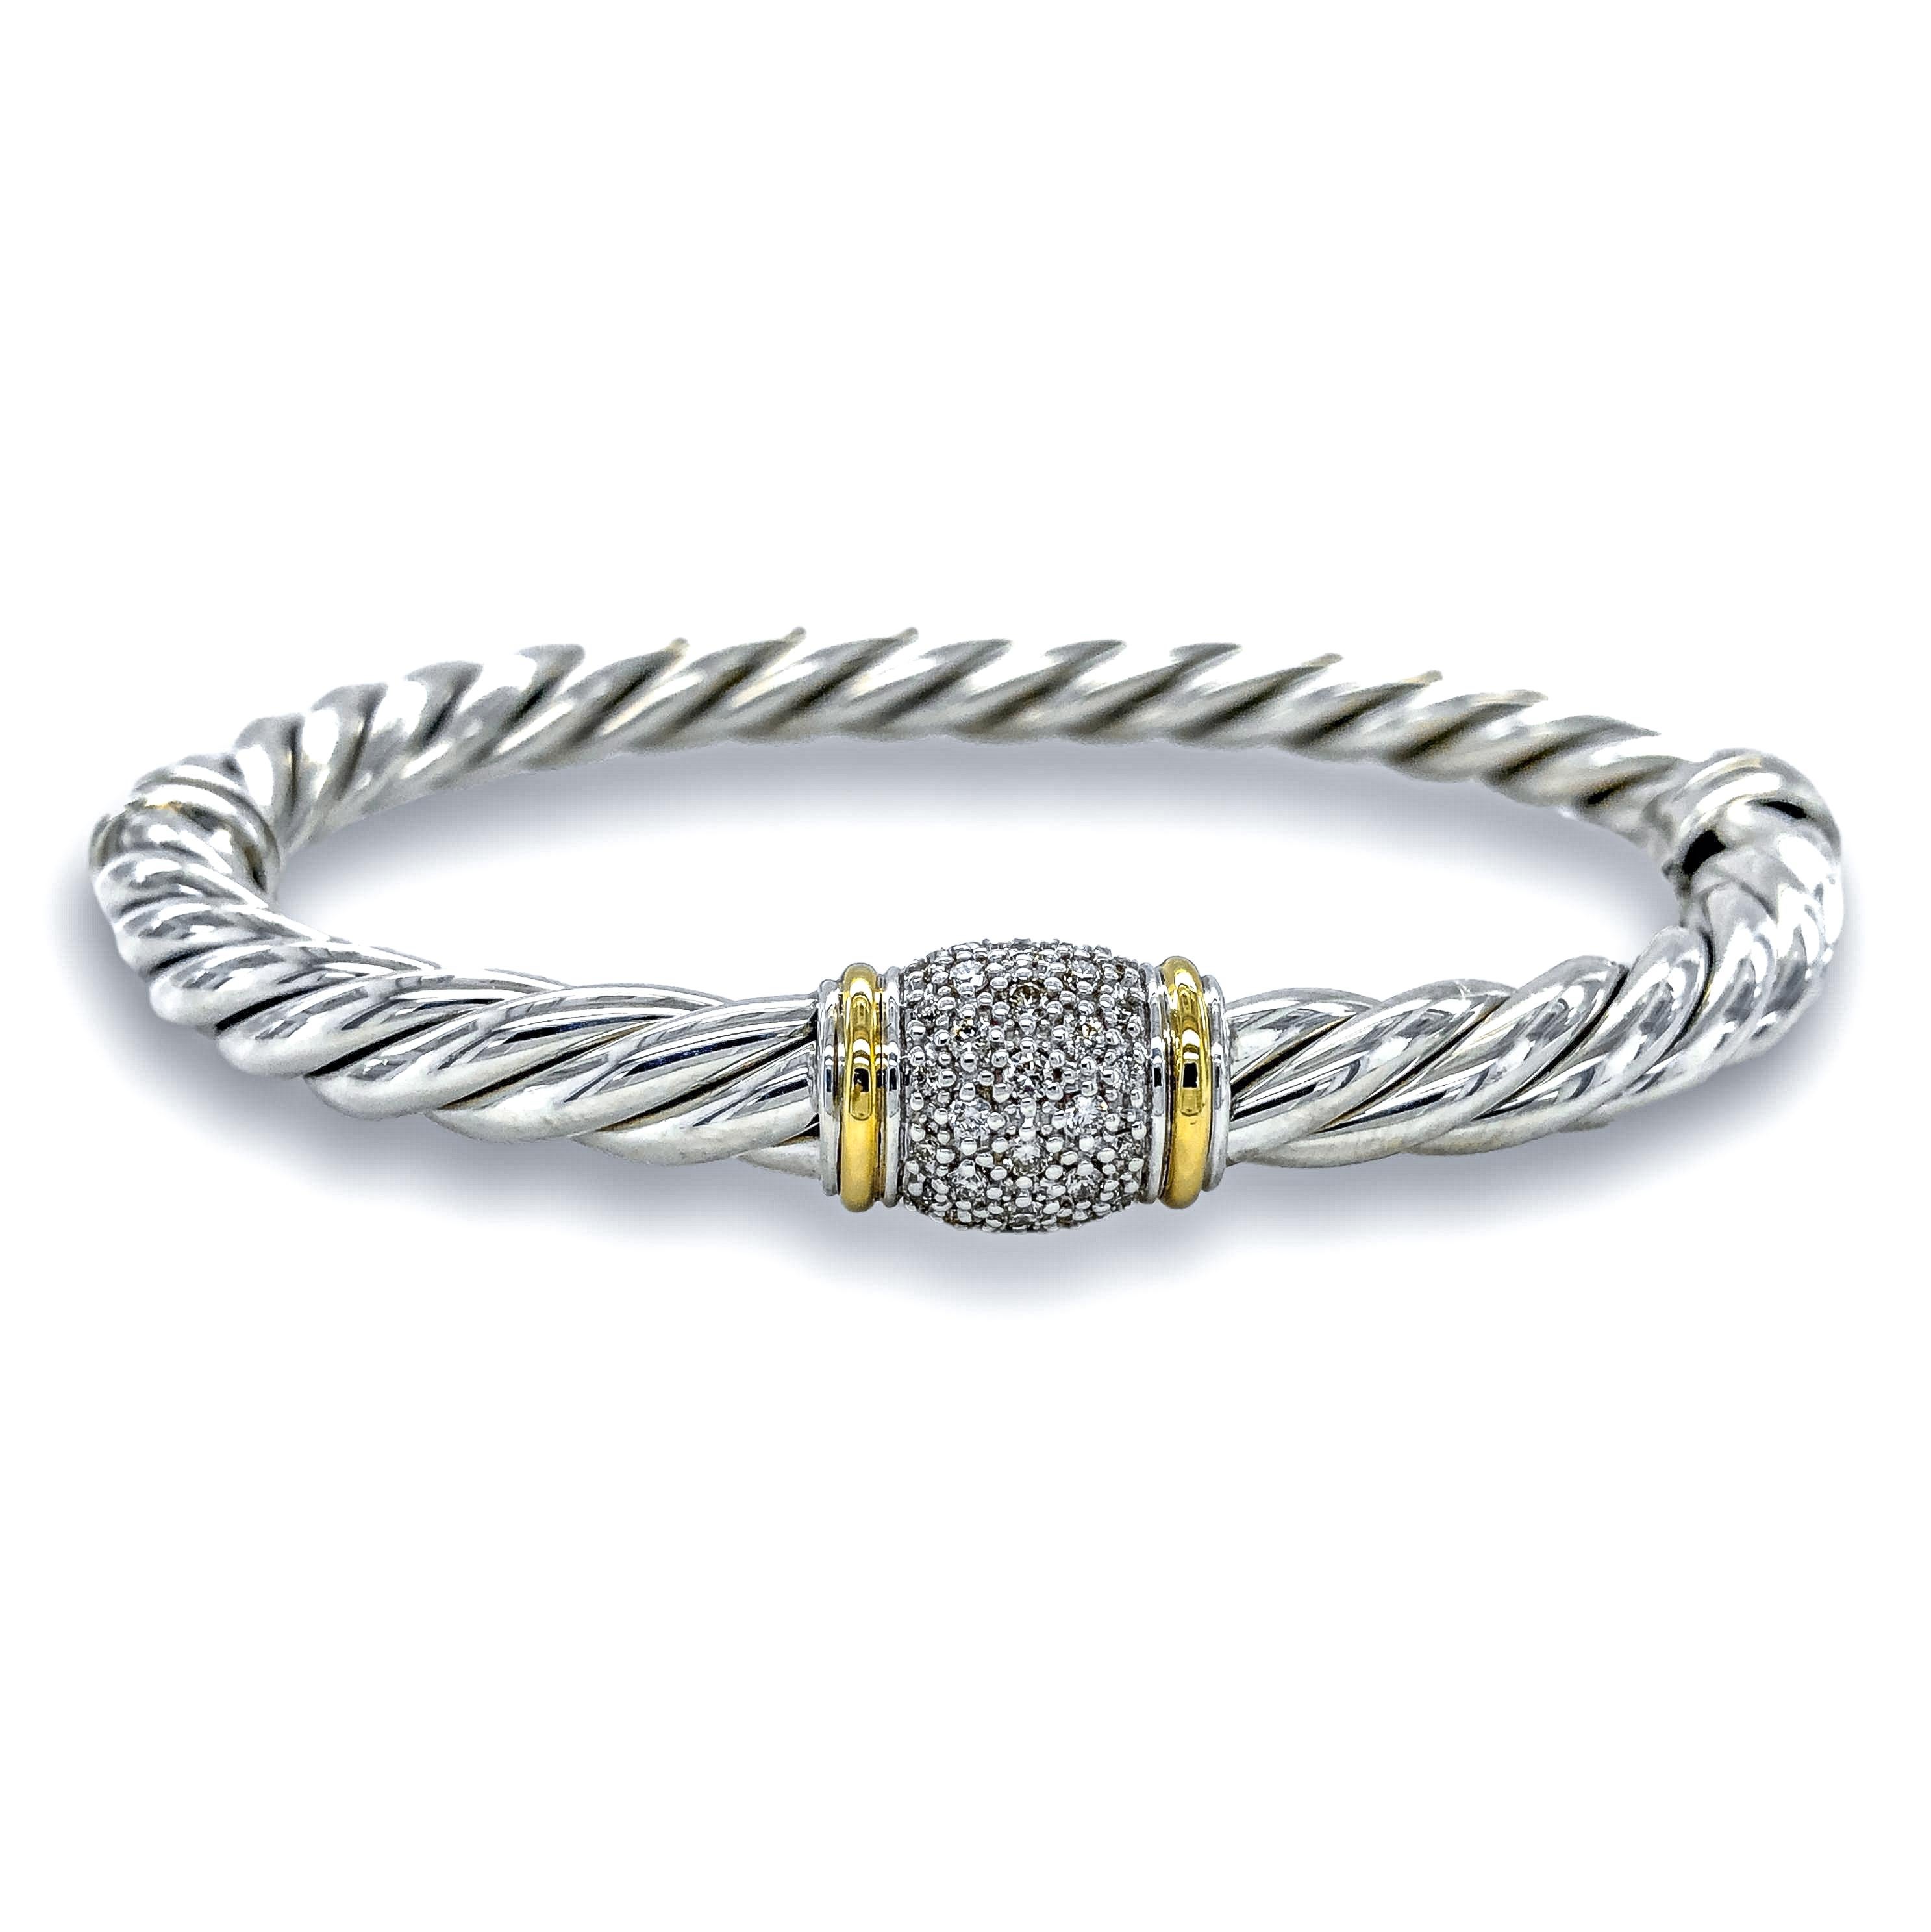 Vintage David Yurman Narrow two tone bangle bracelet from the cable classics collection finely crafted in sterling silver featuring a station of pave set round brilliant cut diamonds weighing 0.22 cts total weight approximately inside 2 strip